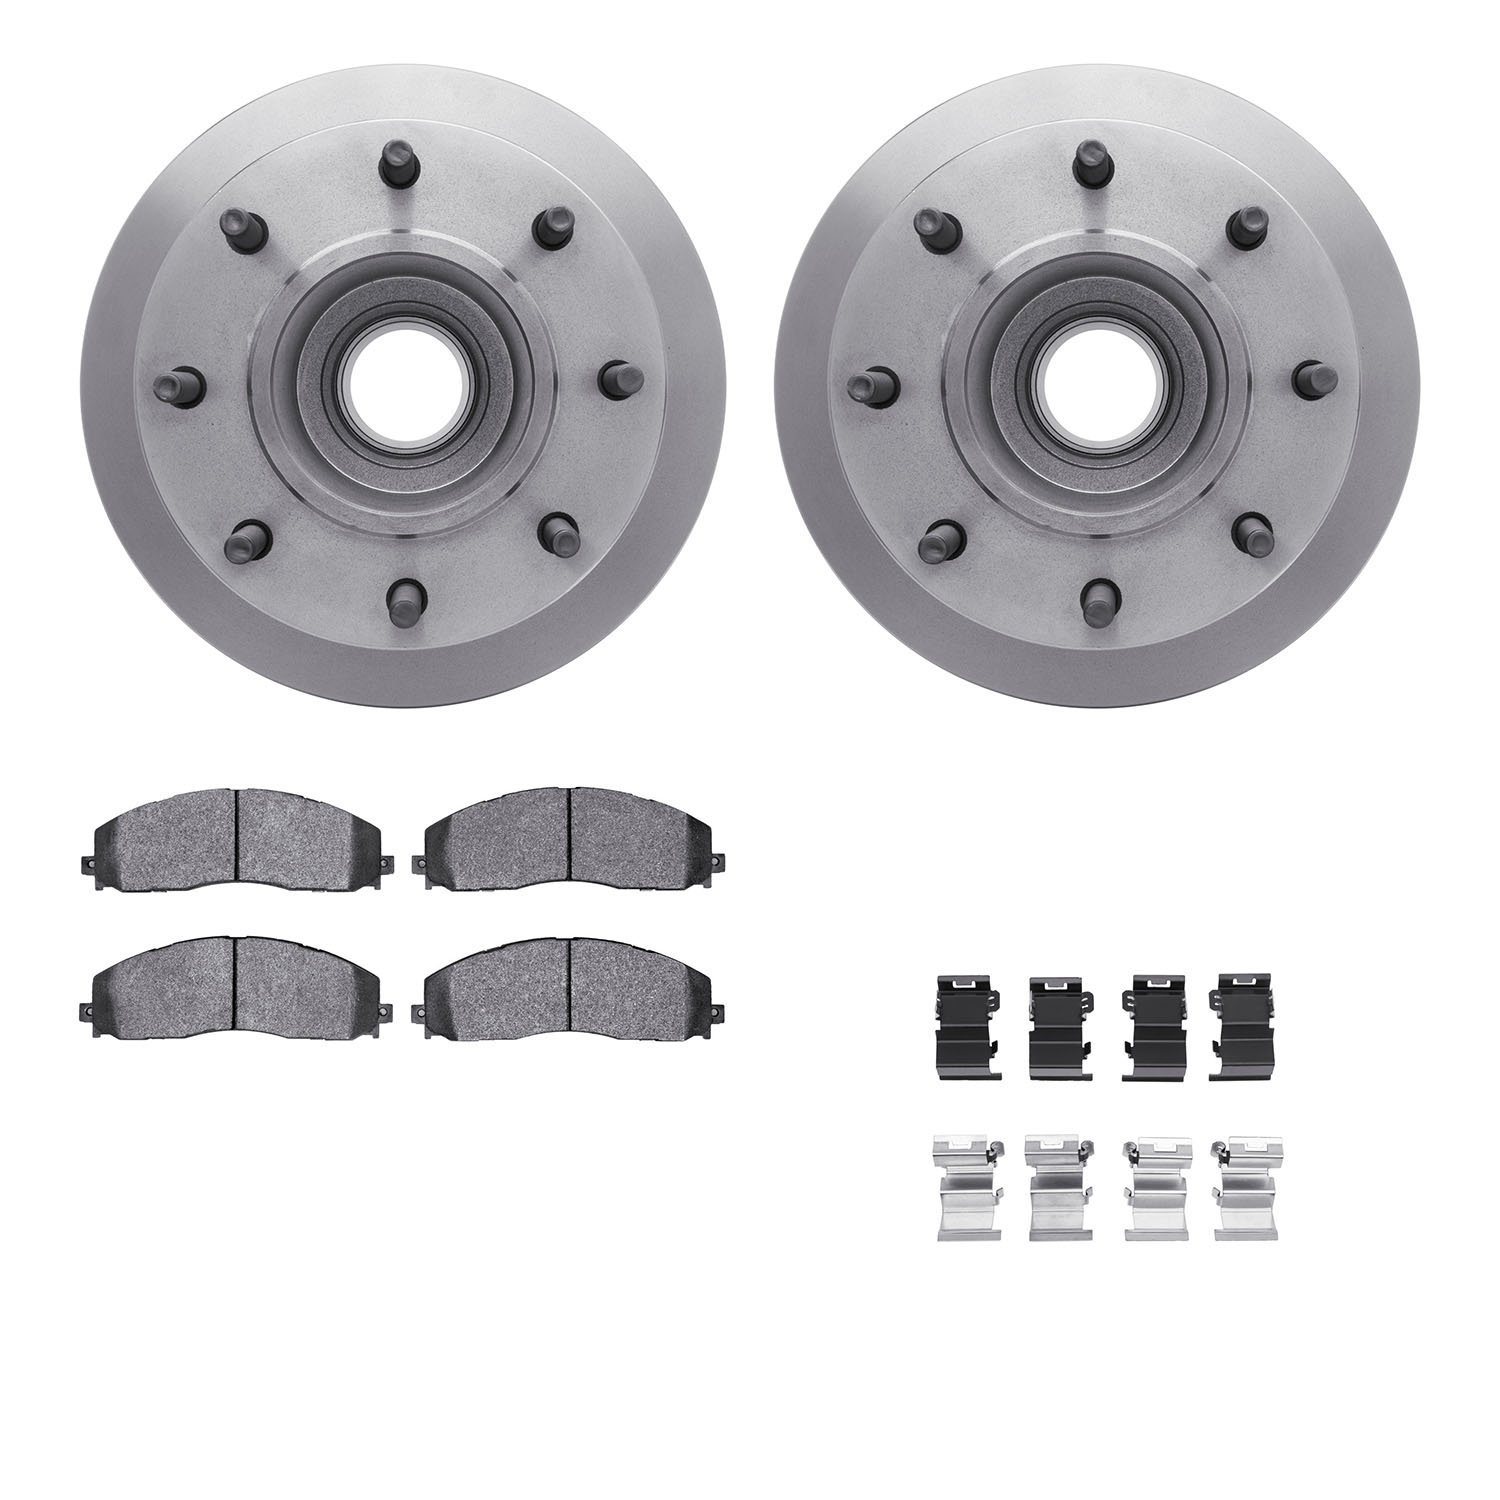 6412-54299 Brake Rotors with Ultimate-Duty Brake Pads Kit & Hardware, Fits Select Ford/Lincoln/Mercury/Mazda, Position: Front